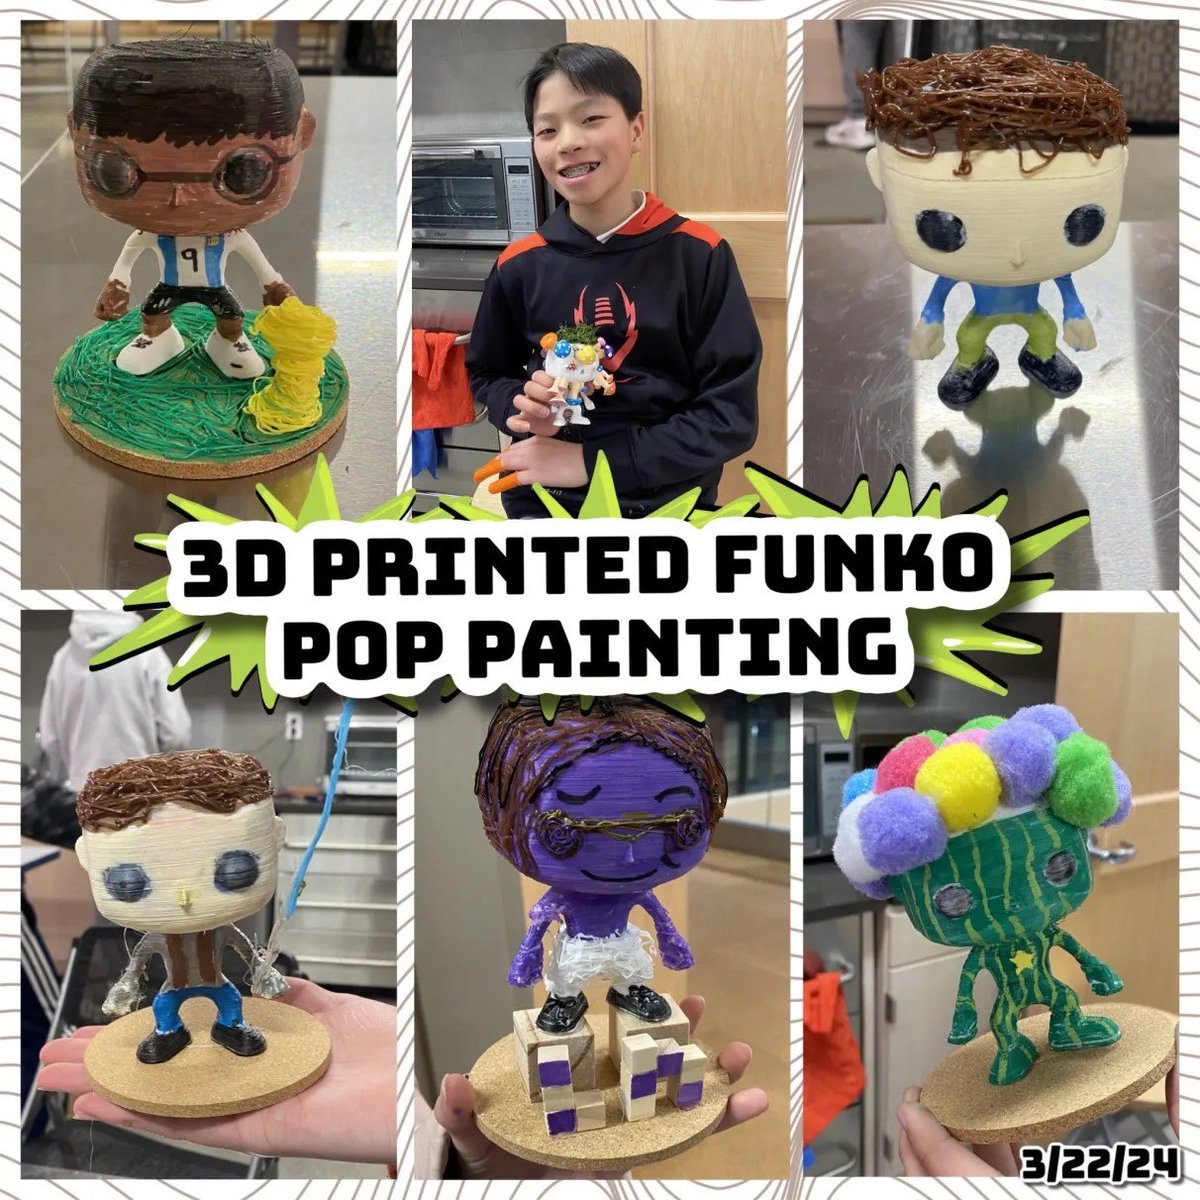 Teens created their own custom Funko Pops! We provided Pops made with our 3D Printer and teens had fun in the Makerspace creating familiar characters and some new ones! Learn about the Library's Makerspace Services, including 3D Printing, here: hhhlibrary.org/makerspace-ser…